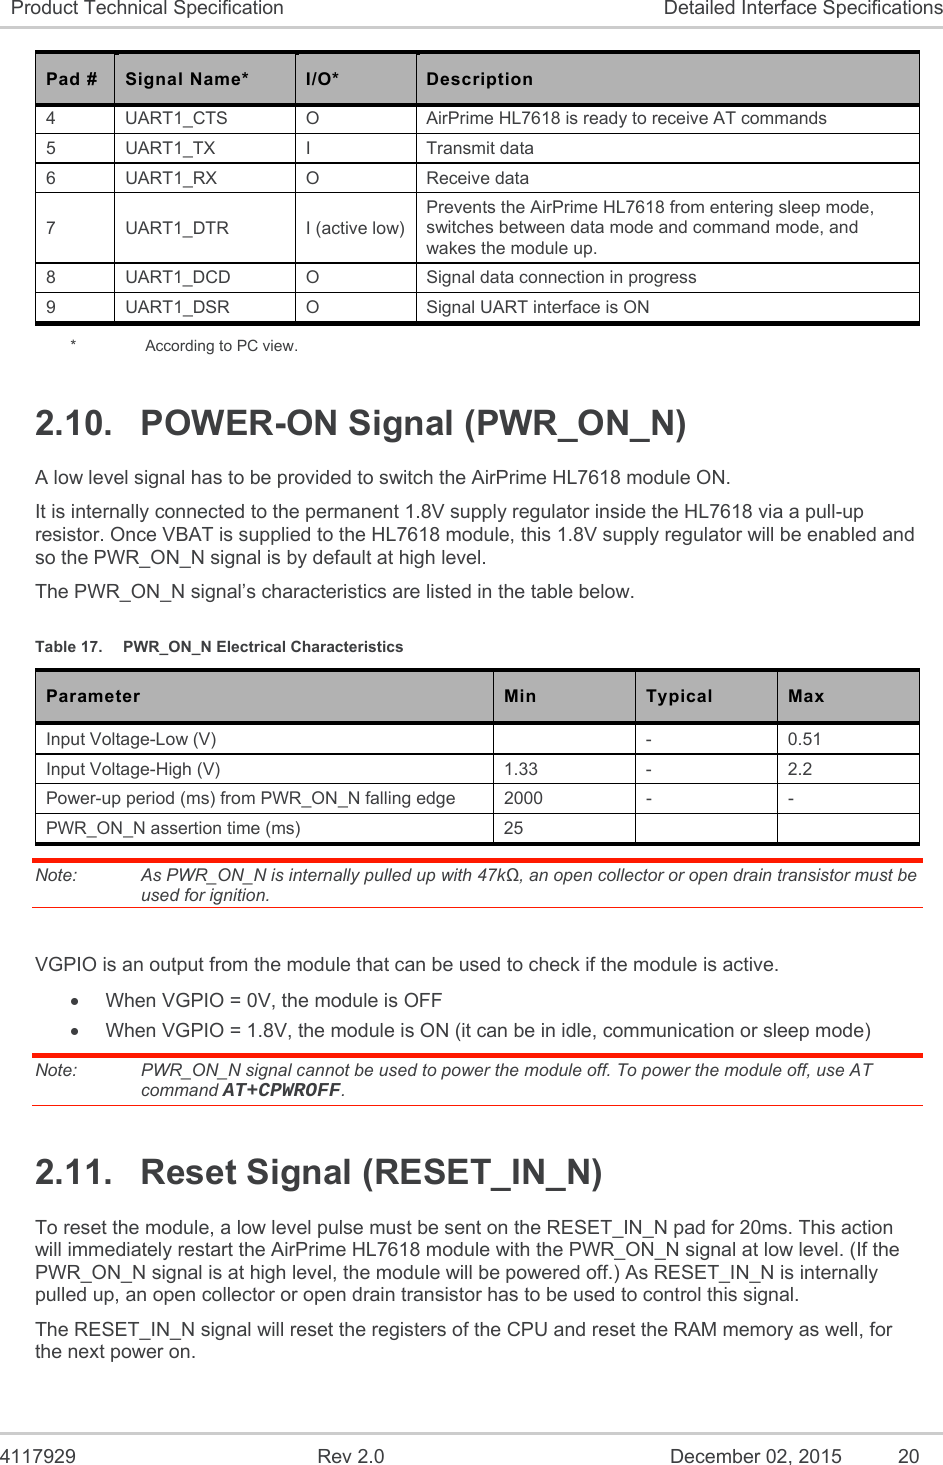  4117929  Rev 2.0  December 02, 2015  20 Product Technical Specification  Detailed Interface Specifications Pad #  Signal Name*  I/O*  Description 4  UART1_CTS  O  AirPrime HL7618 is ready to receive AT commands 5  UART1_TX  I  Transmit data 6  UART1_RX  O  Receive data 7  UART1_DTR  I (active low) Prevents the AirPrime HL7618 from entering sleep mode, switches between data mode and command mode, and wakes the module up. 8  UART1_DCD  O  Signal data connection in progress 9  UART1_DSR  O  Signal UART interface is ON *    According to PC view. 2.10.  POWER-ON Signal (PWR_ON_N) A low level signal has to be provided to switch the AirPrime HL7618 module ON. It is internally connected to the permanent 1.8V supply regulator inside the HL7618 via a pull-up resistor. Once VBAT is supplied to the HL7618 module, this 1.8V supply regulator will be enabled and so the PWR_ON_N signal is by default at high level. The PWR_ON_N signal’s characteristics are listed in the table below. Table 17.  PWR_ON_N Electrical Characteristics Parameter  Min  Typical  Max Input Voltage-Low (V)    -  0.51 Input Voltage-High (V)  1.33  -  2.2 Power-up period (ms) from PWR_ON_N falling edge   2000  -  - PWR_ON_N assertion time (ms)  25     Note:   As PWR_ON_N is internally pulled up with 47kΩ, an open collector or open drain transistor must be used for ignition.  VGPIO is an output from the module that can be used to check if the module is active.   When VGPIO = 0V, the module is OFF   When VGPIO = 1.8V, the module is ON (it can be in idle, communication or sleep mode) Note:   PWR_ON_N signal cannot be used to power the module off. To power the module off, use AT command AT+CPWROFF. 2.11.  Reset Signal (RESET_IN_N) To reset the module, a low level pulse must be sent on the RESET_IN_N pad for 20ms. This action will immediately restart the AirPrime HL7618 module with the PWR_ON_N signal at low level. (If the PWR_ON_N signal is at high level, the module will be powered off.) As RESET_IN_N is internally pulled up, an open collector or open drain transistor has to be used to control this signal. The RESET_IN_N signal will reset the registers of the CPU and reset the RAM memory as well, for the next power on. 